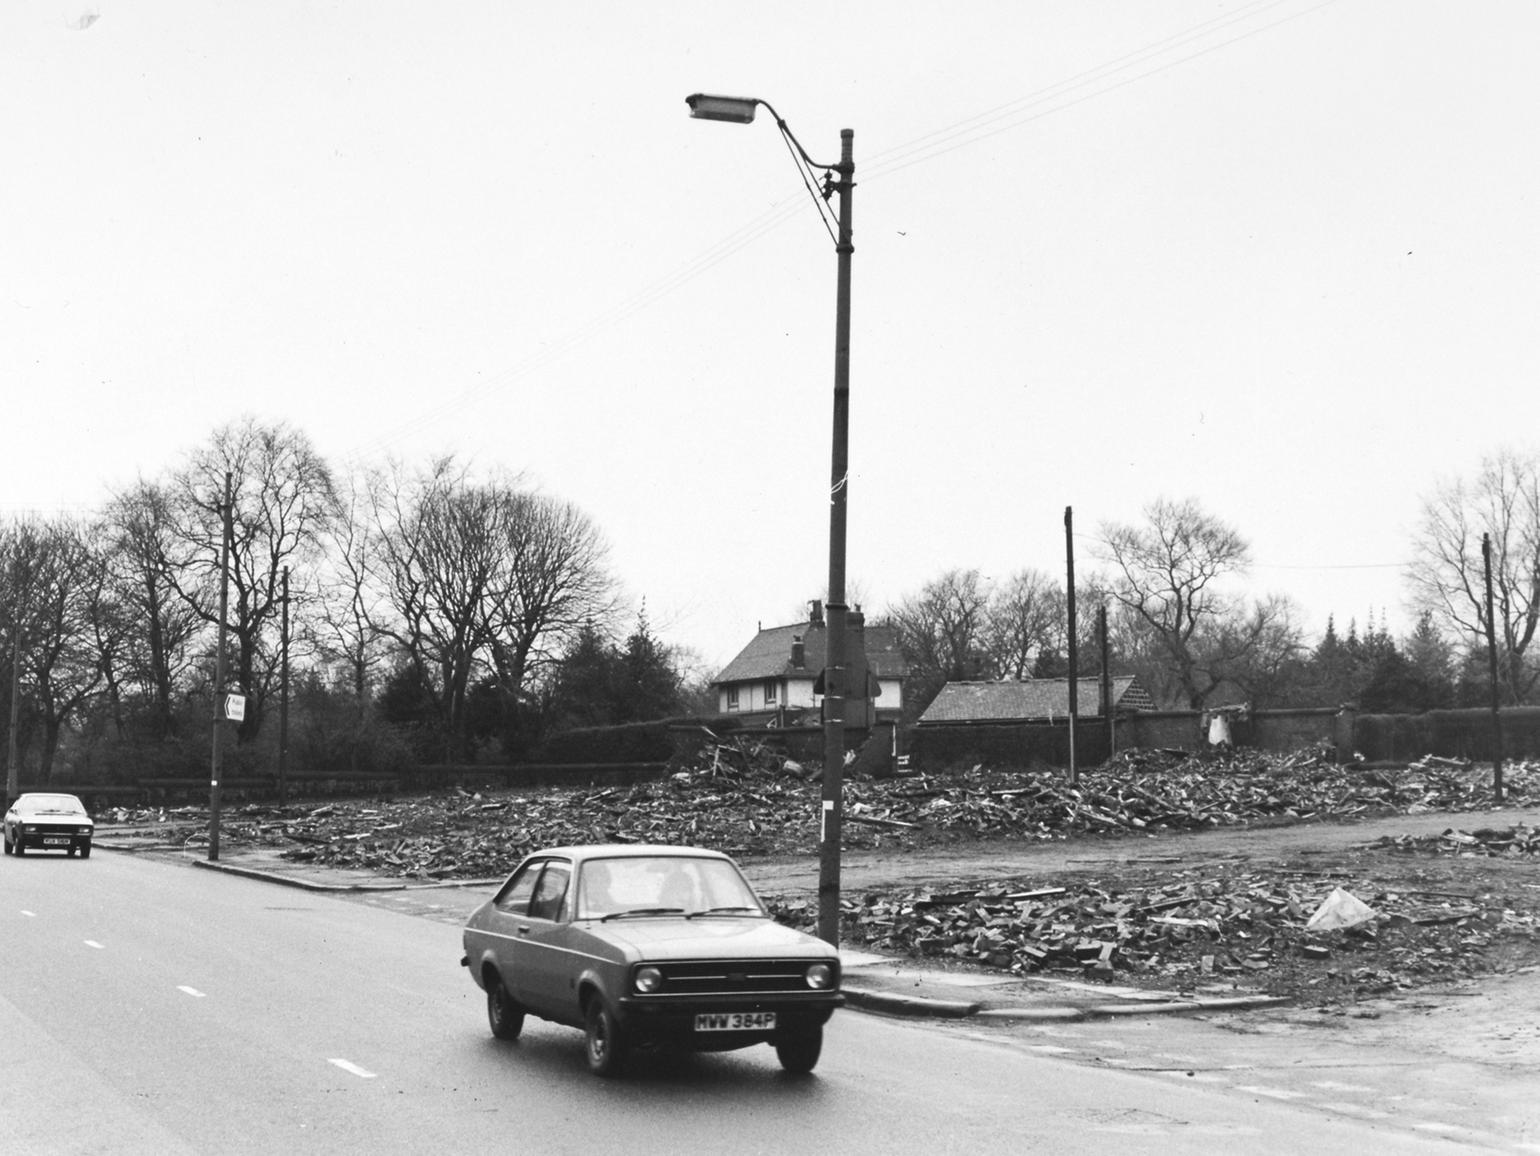 The site of The Hopes on Stanningley Road in west Leeds, exposed a new view of Gotts Park.